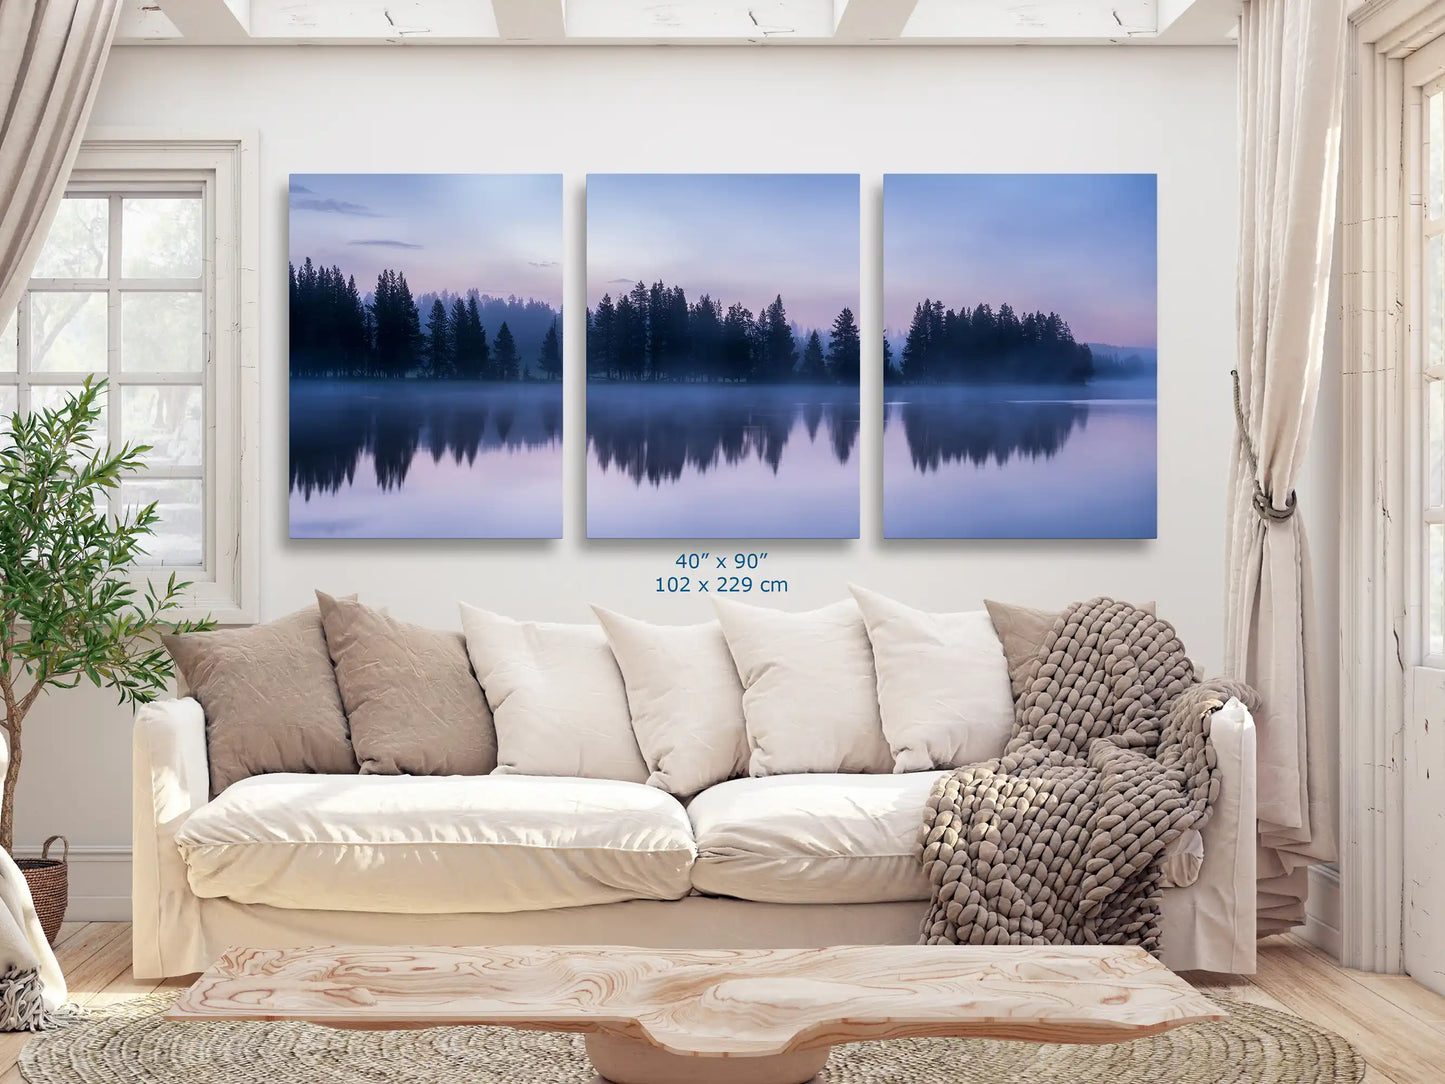 Massive 40x90 three-panel wall art of Yellowstone Lake's twilight, transforming a living room wall into a window to nature's serenity.